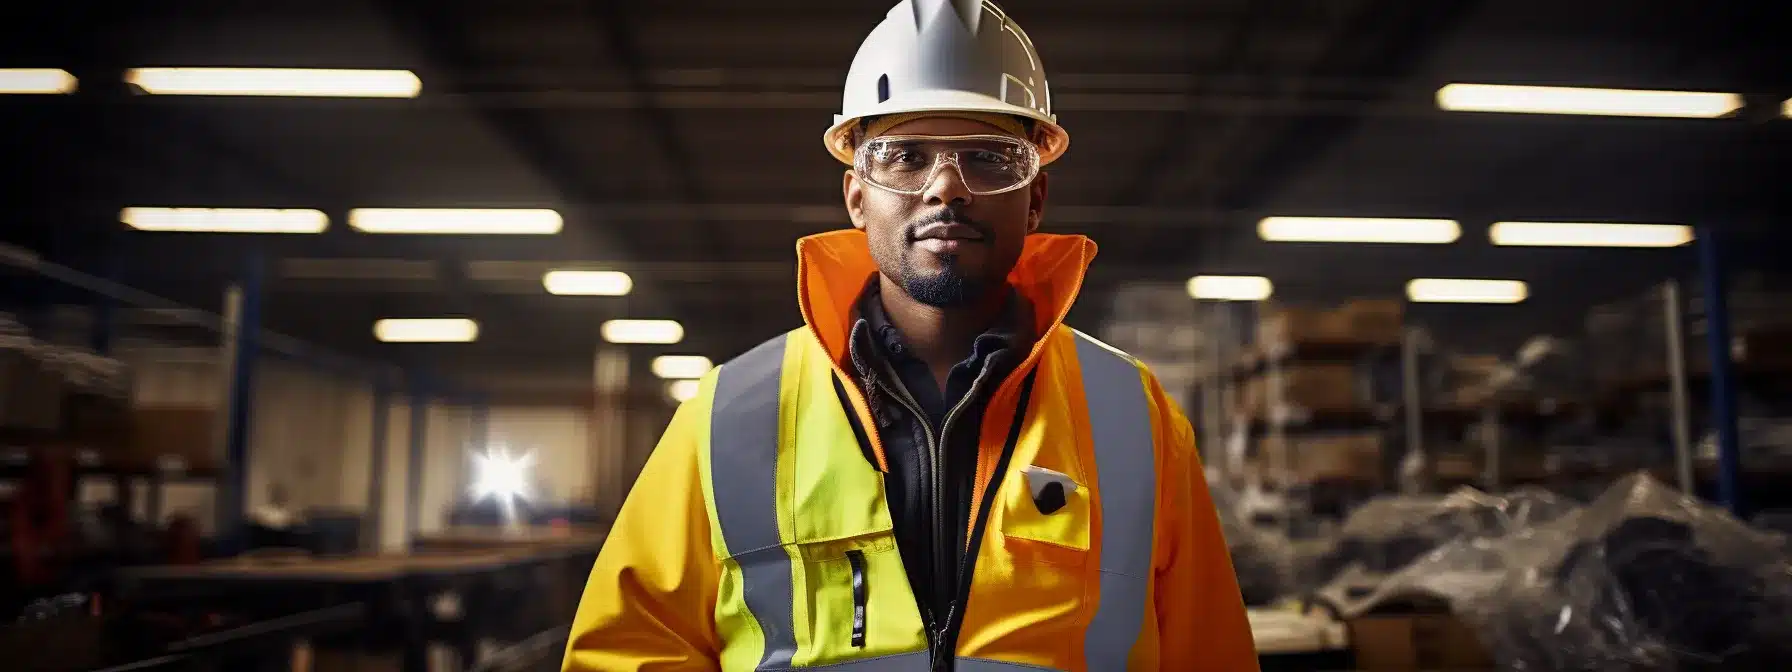 A Person Wearing Various Ppe Items, Such As A Hard Hat, Safety Goggles, And A High Visibility Vest, Standing In A Workplace Setting.